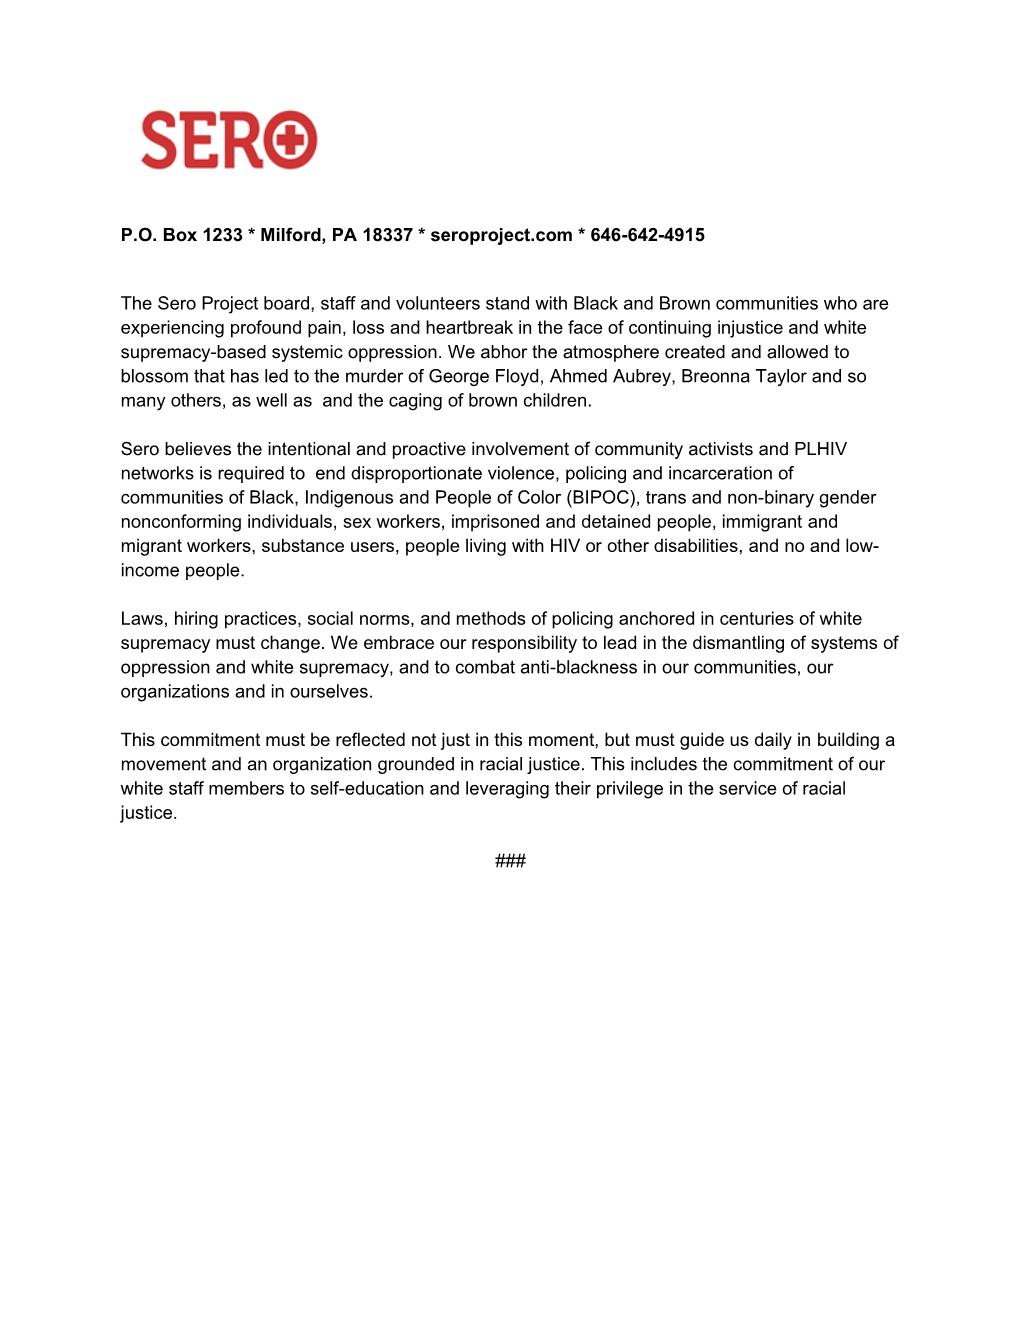 SERO Statement on Racial Injustices